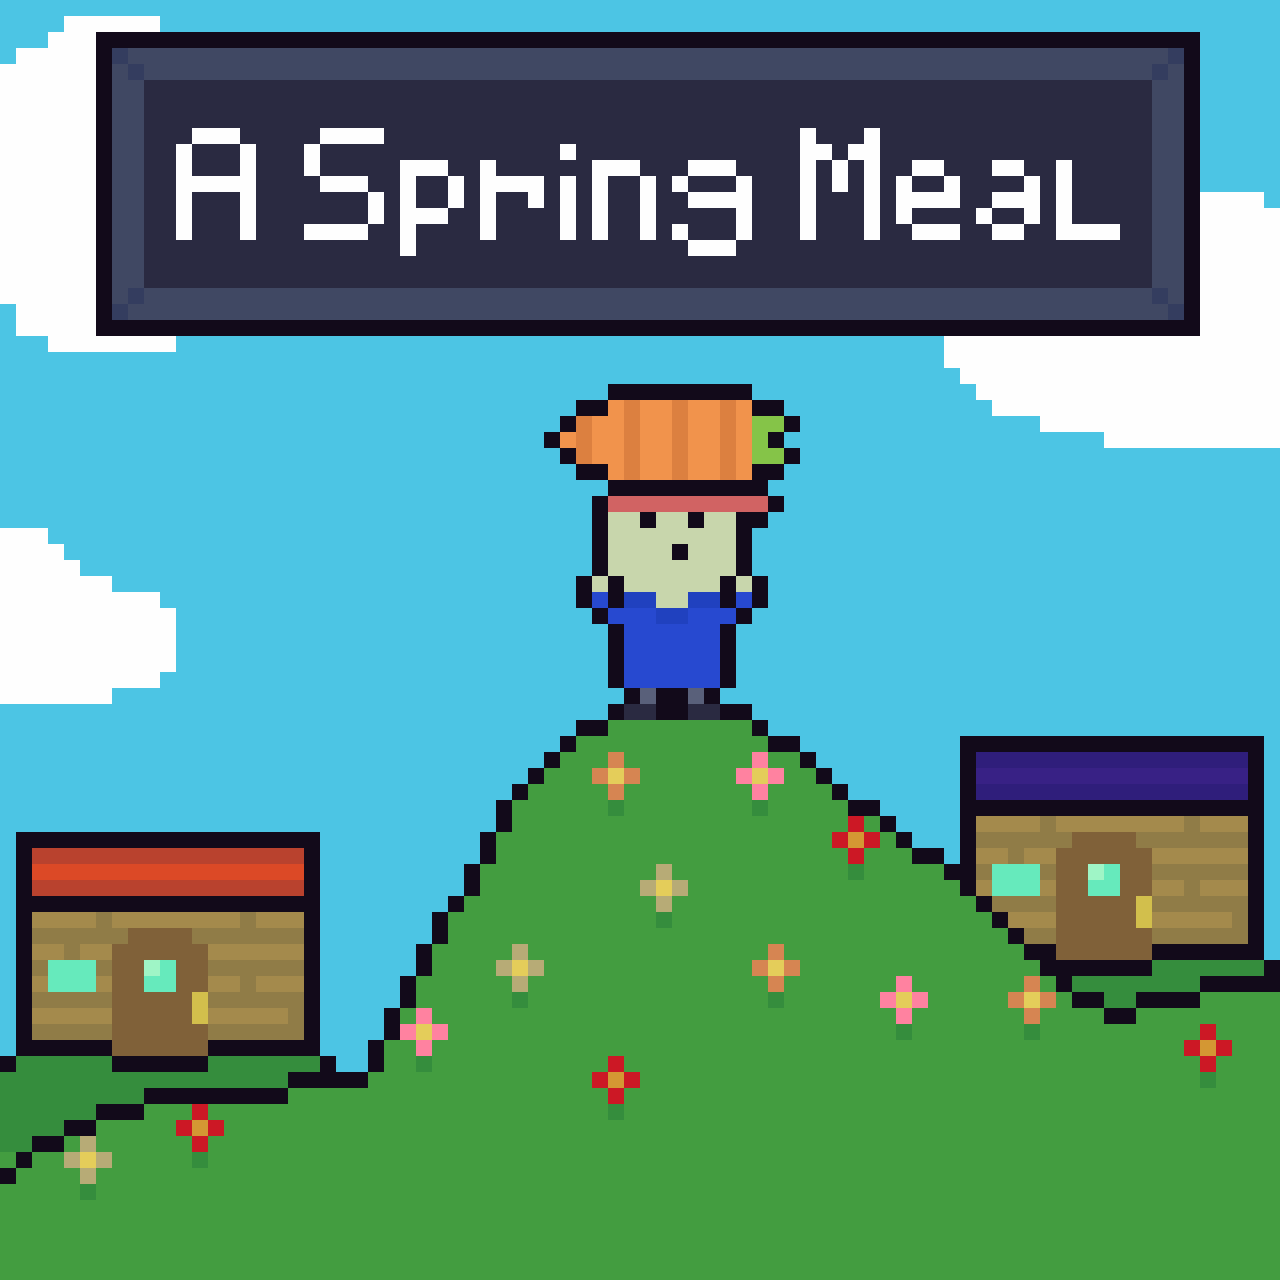 A Spring Meal